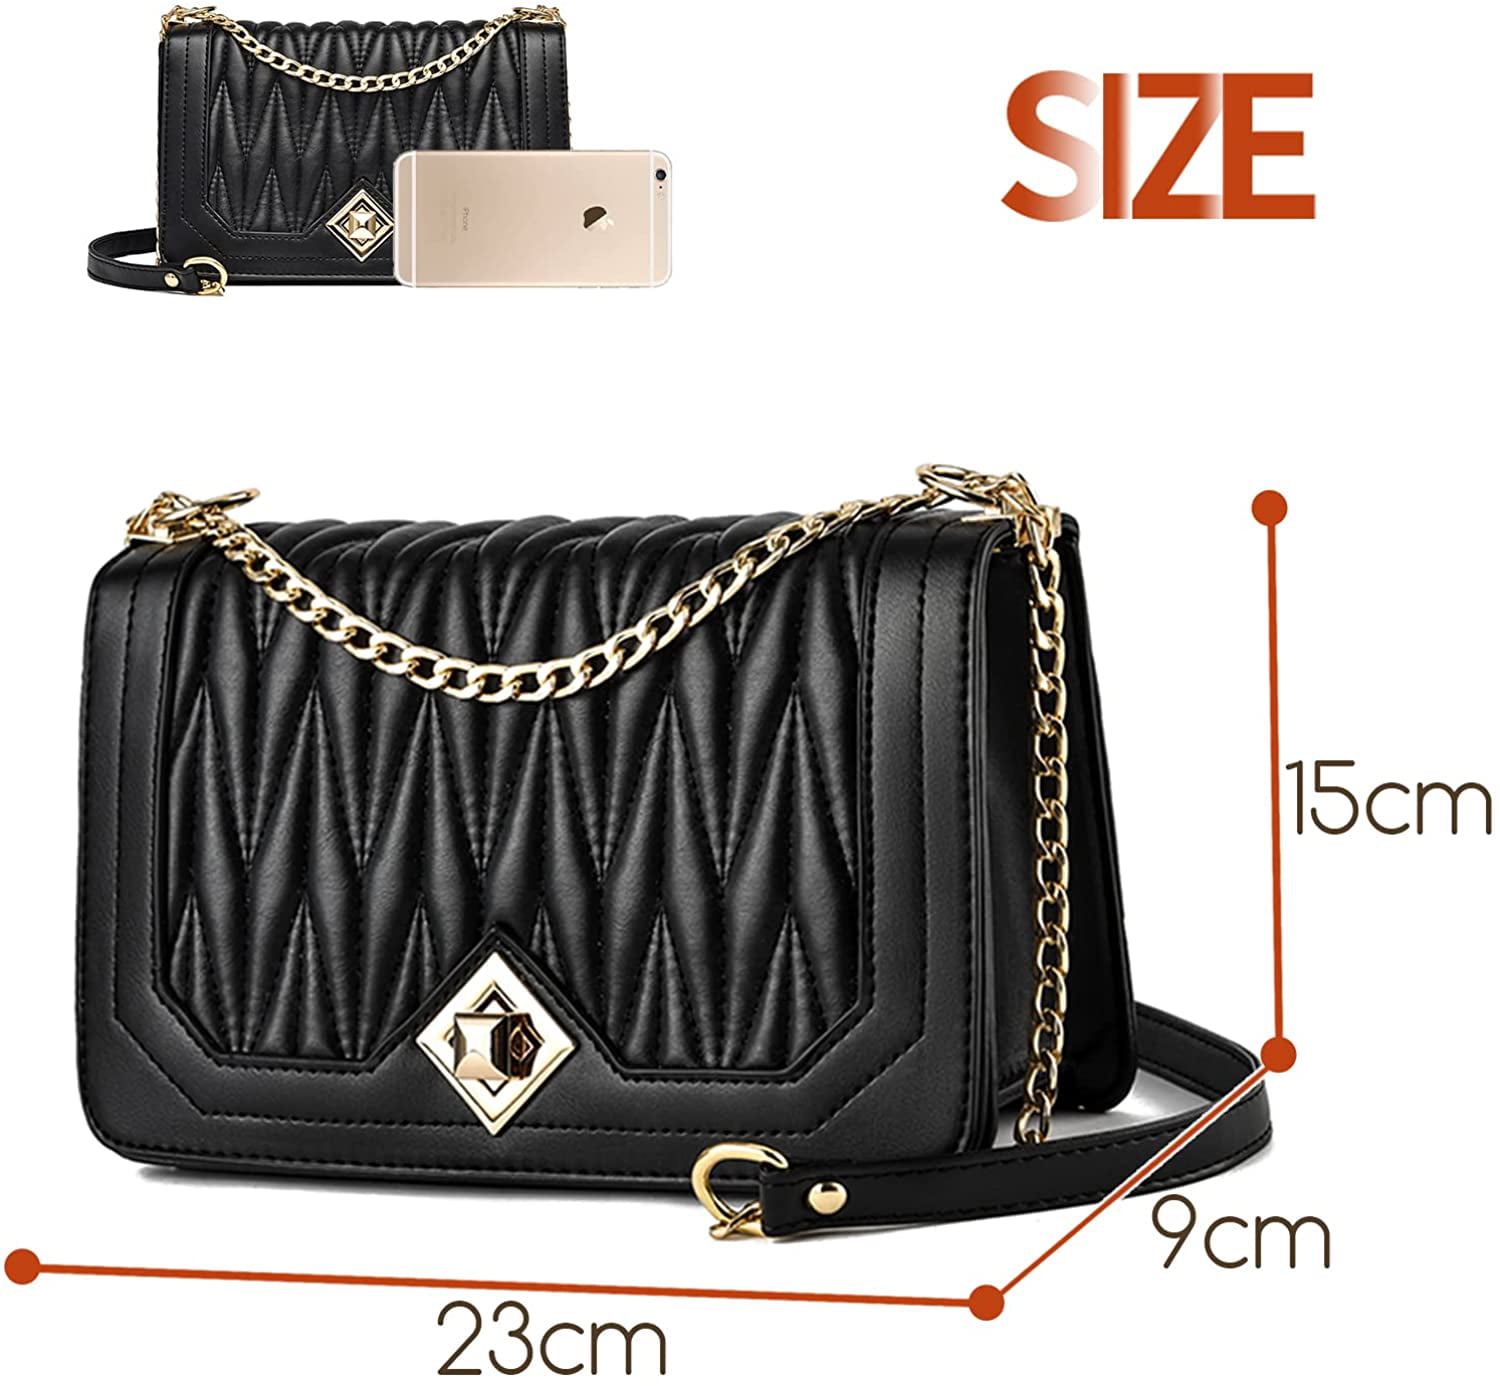 PS PETITE SIMONE Crossbody Bags for Women Trendy Quilted Bag Shoulder with  Chain Small Handbag Evening Bag Satchel Purses